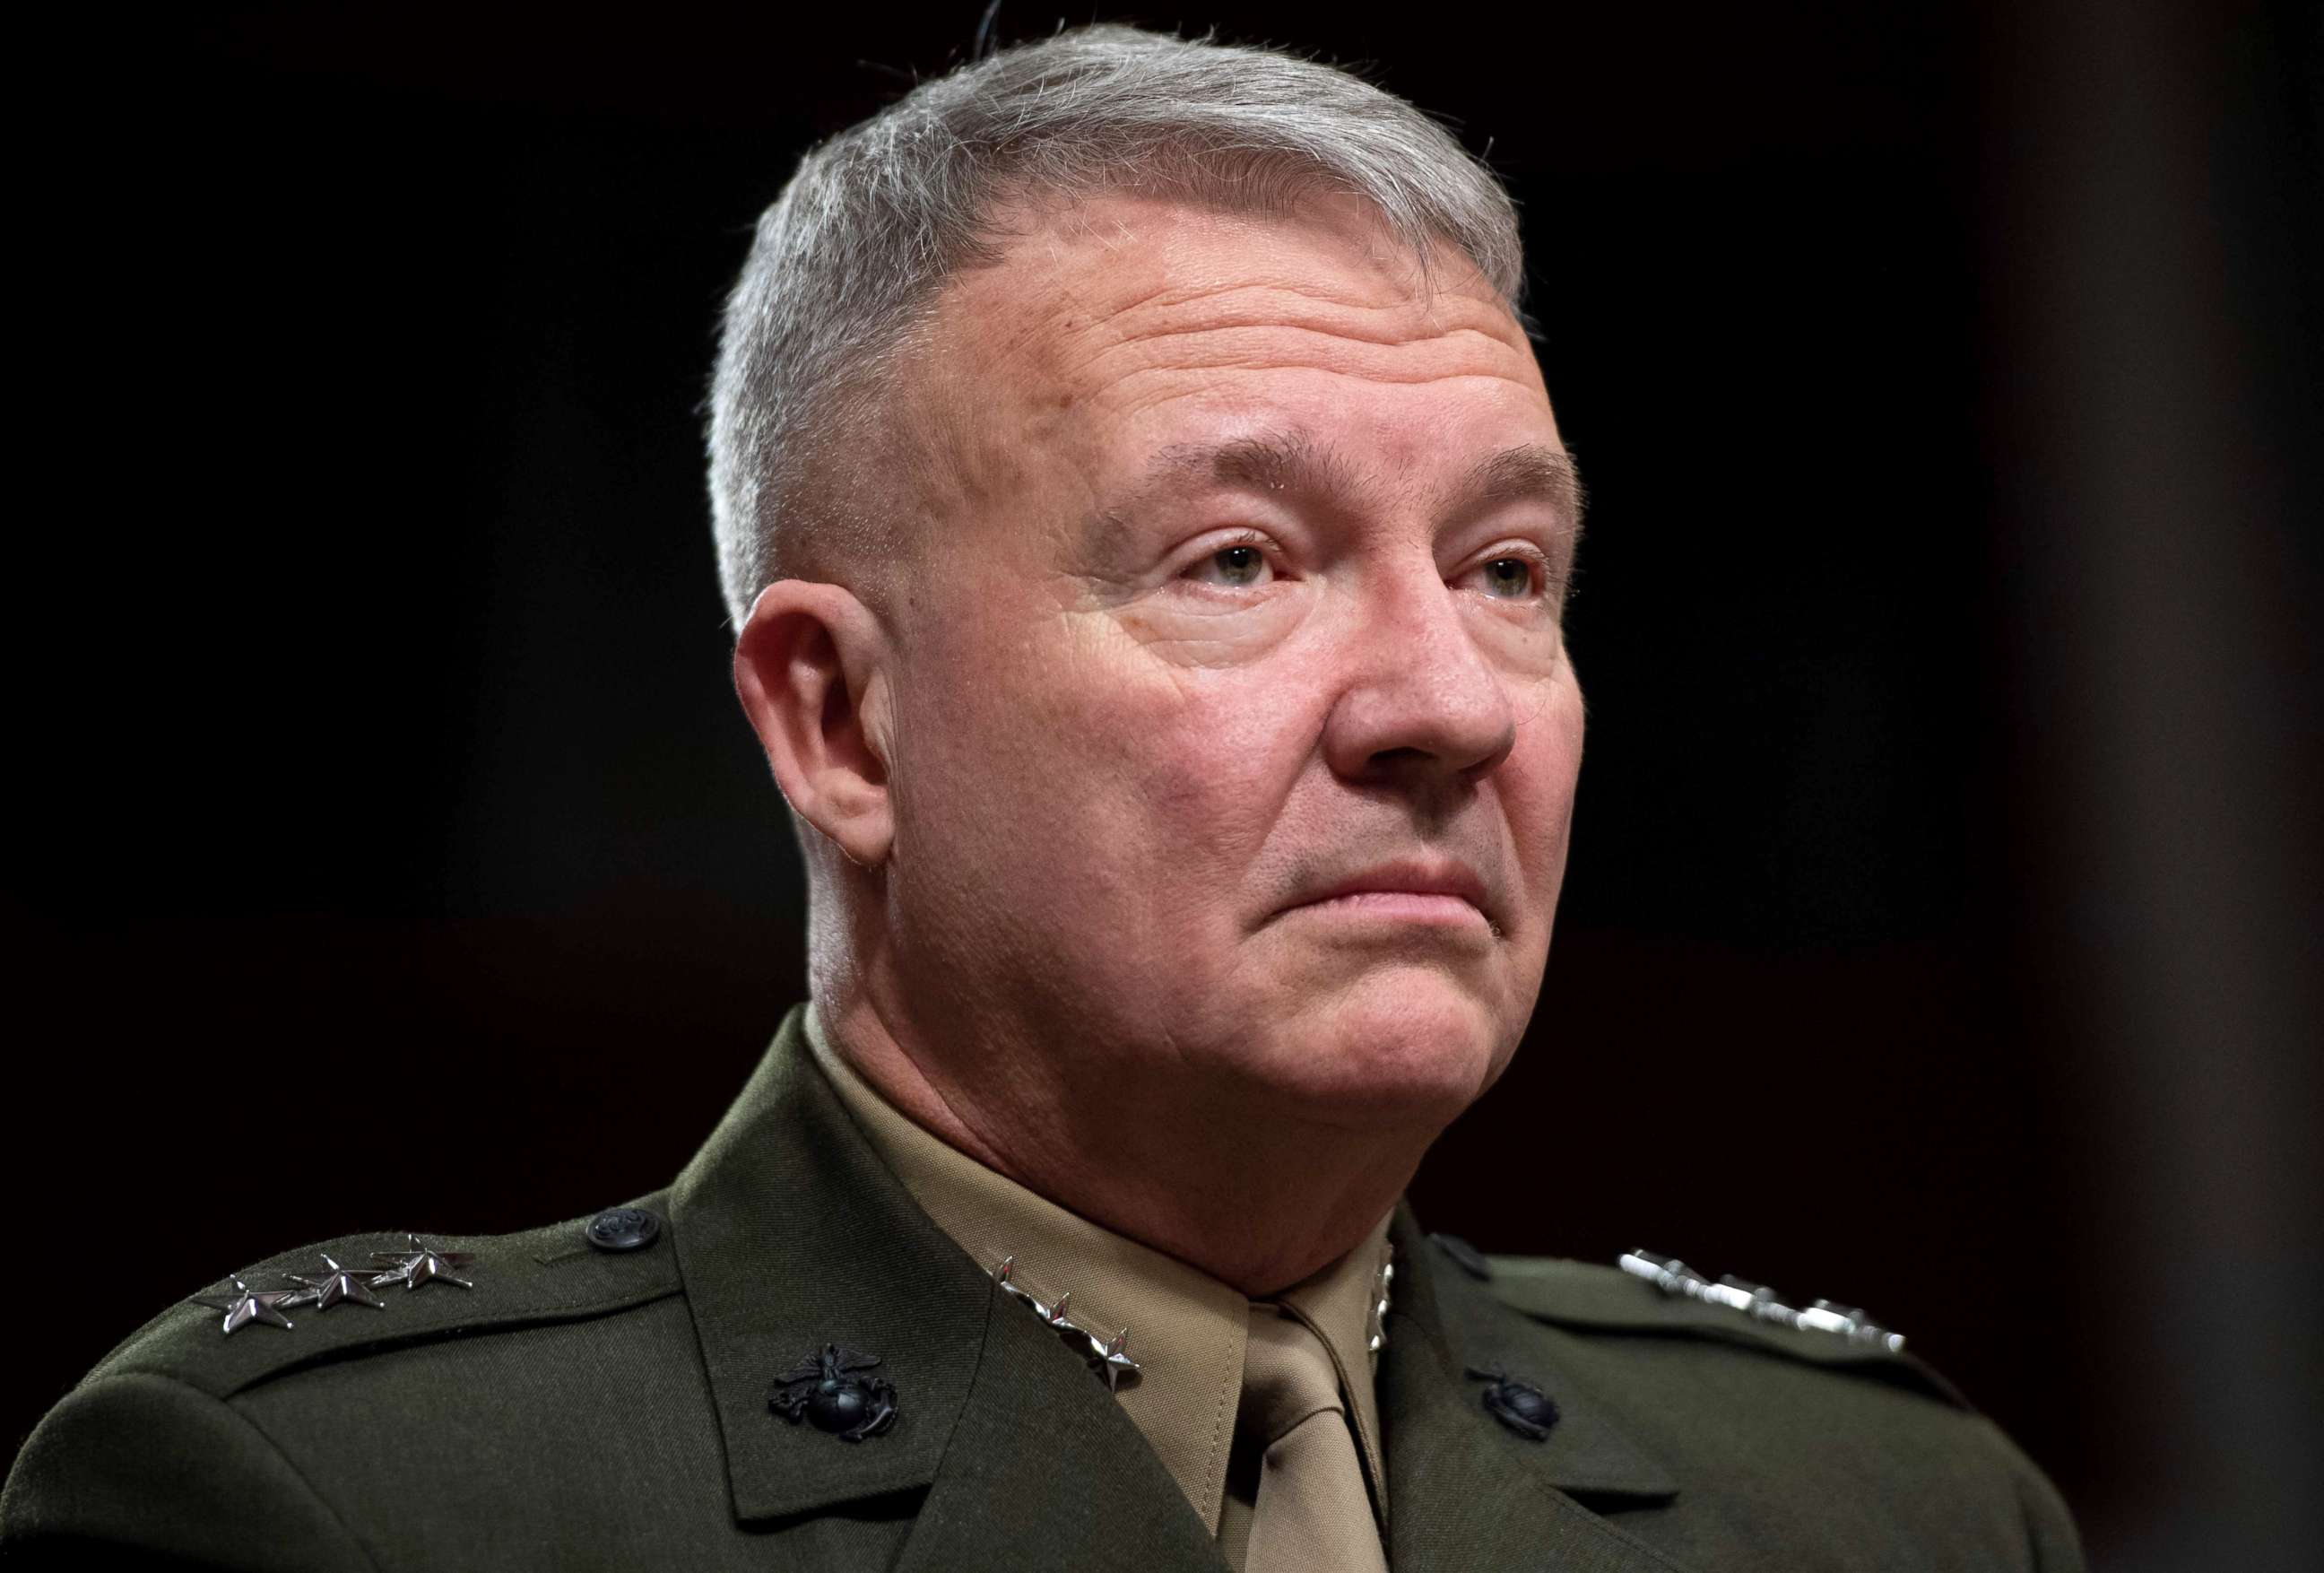 PHOTO: Marine Corps Lt. Gen. Kenneth F. McKenzie Jr., nominee to be general and commander of the US Central Command, testifies during a Senate Armed Service Committee confirmation hearing on Capitol Hill, Dec. 4, 2018.